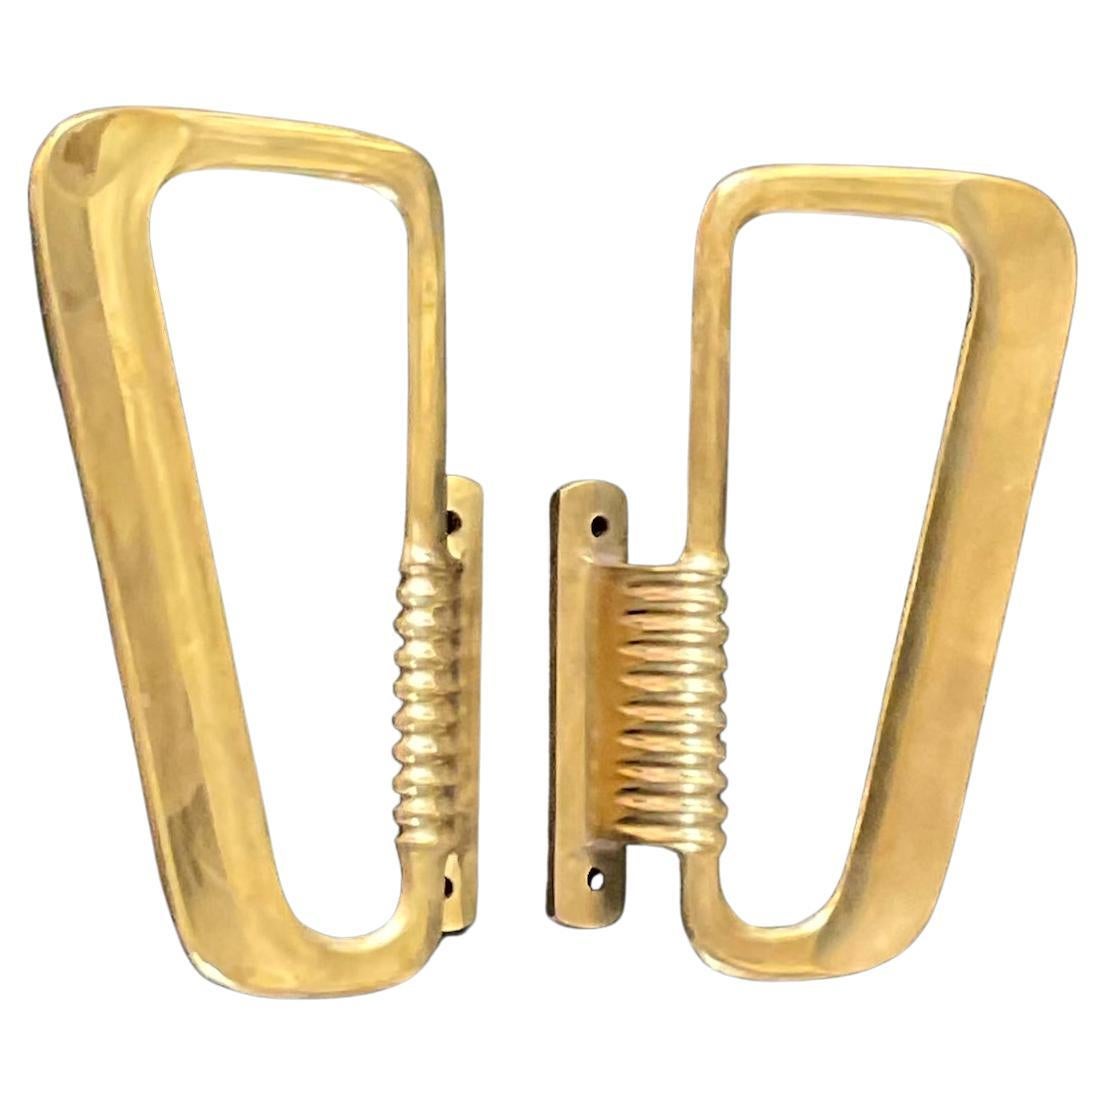 Pair of Large Midcentury Brass Door Handles, Italy [I] For Sale